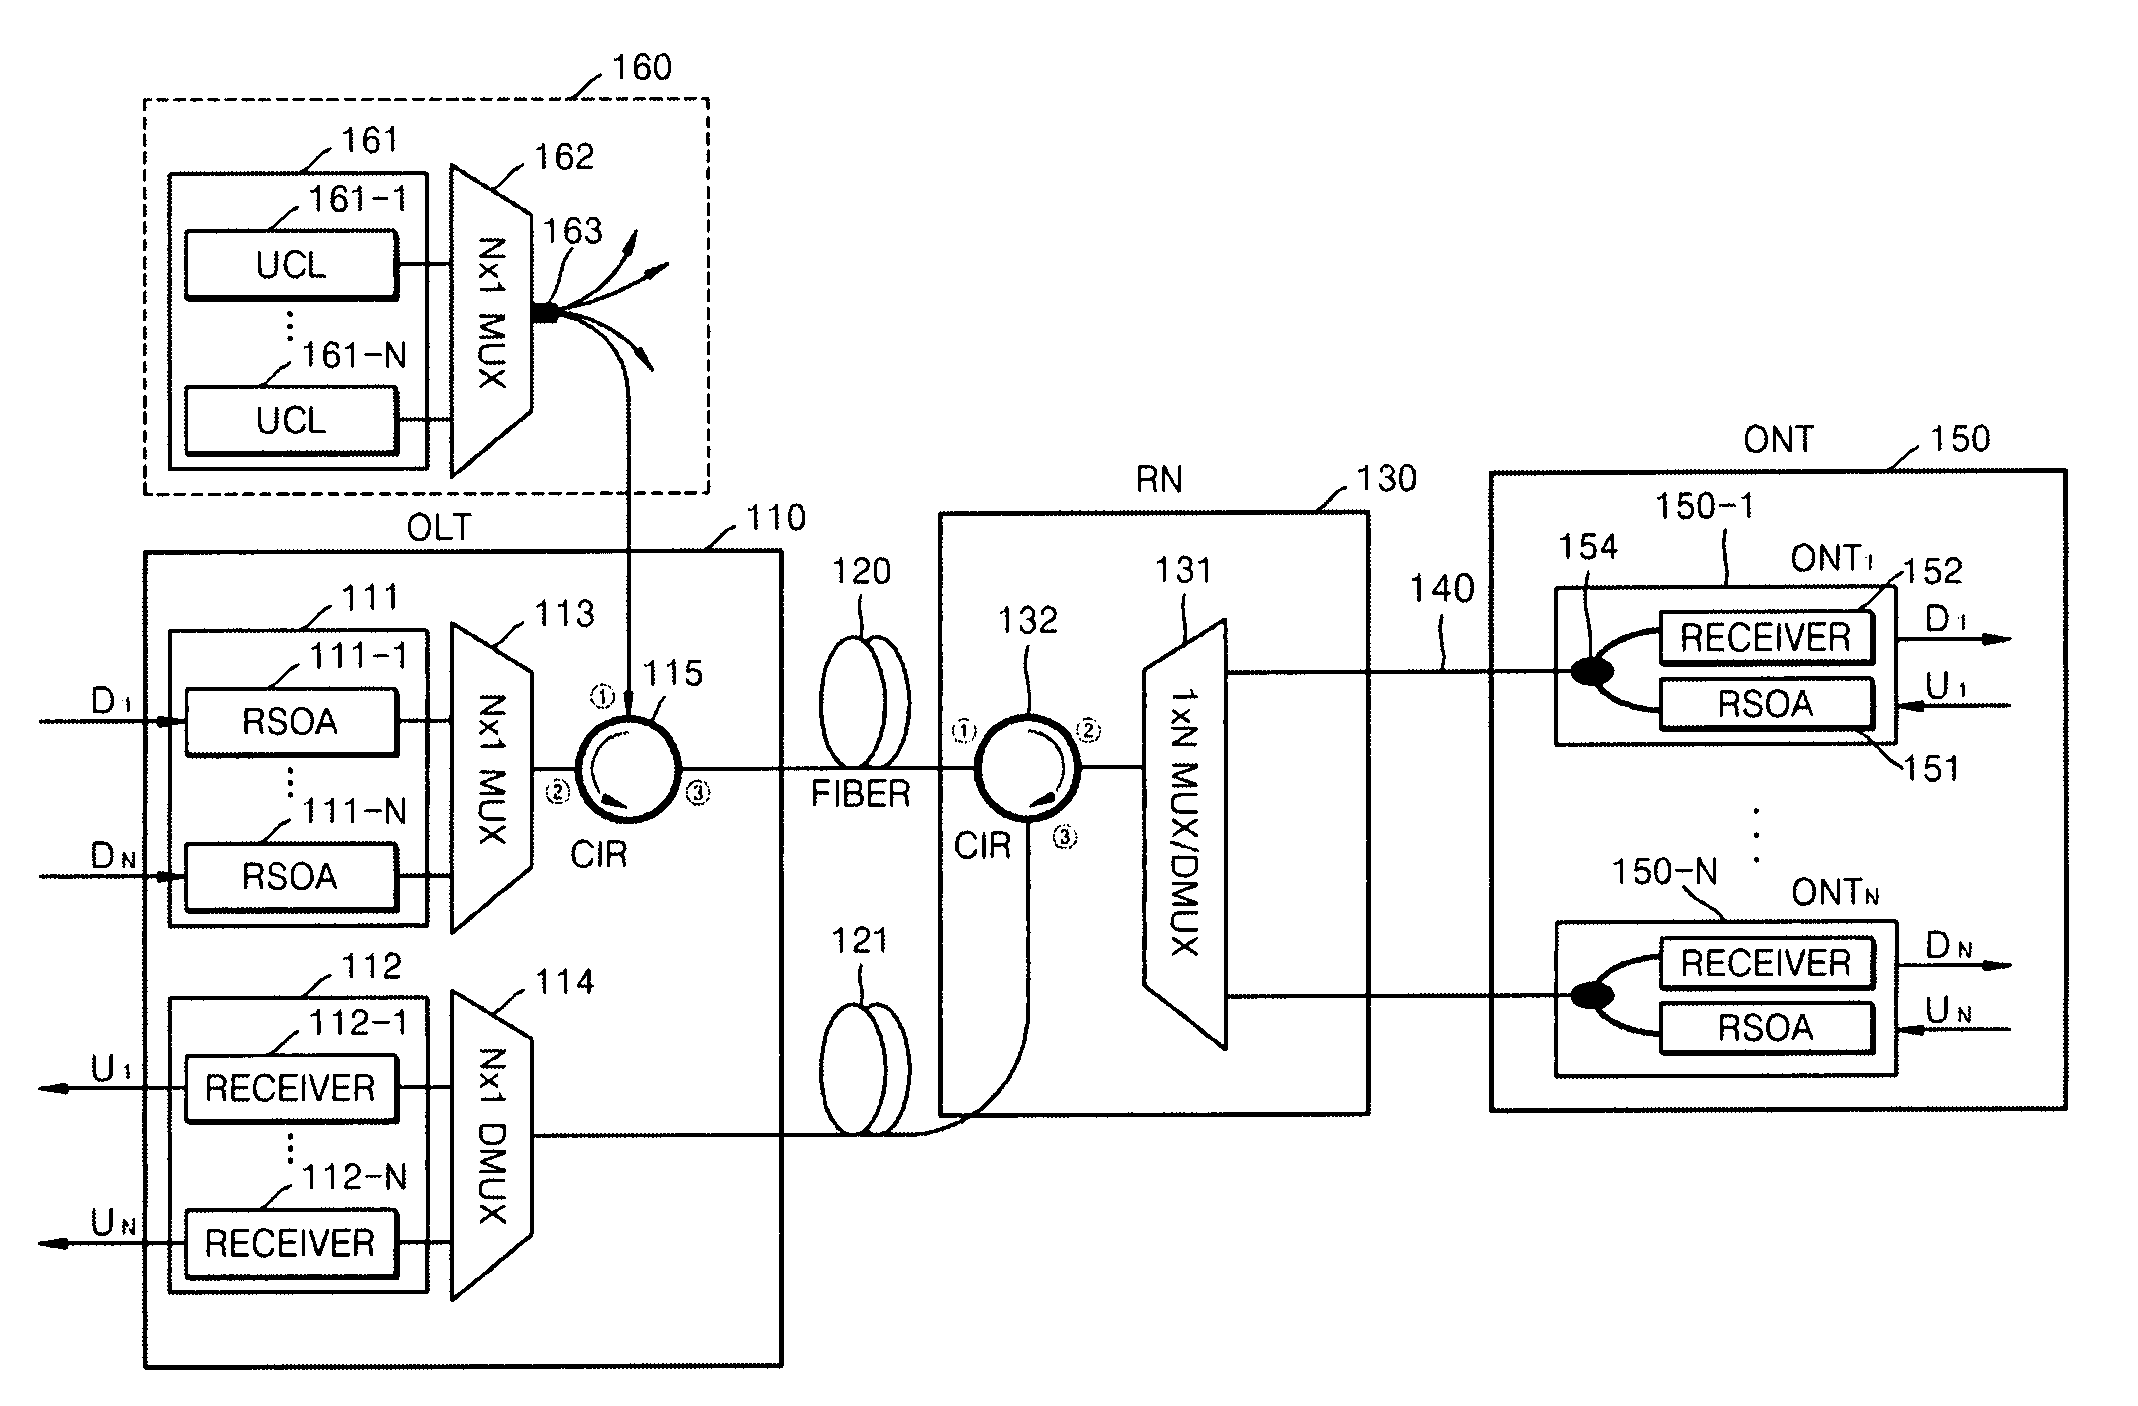 Passive optical network based on reflective semiconductor optical amplifier